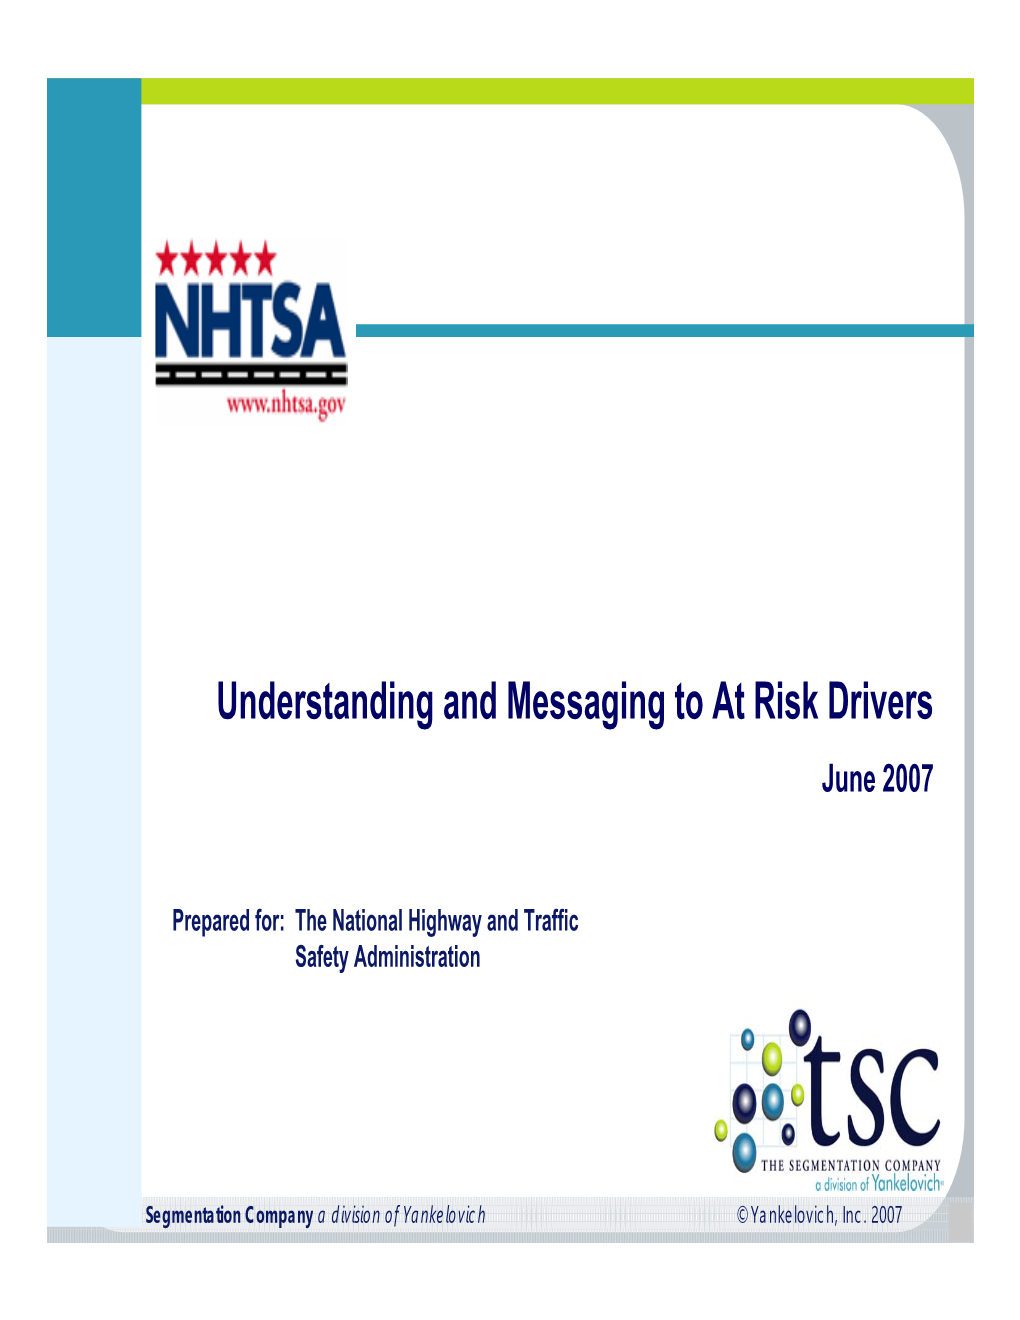 Understanding and Messaging to at Risk Drivers June 2007